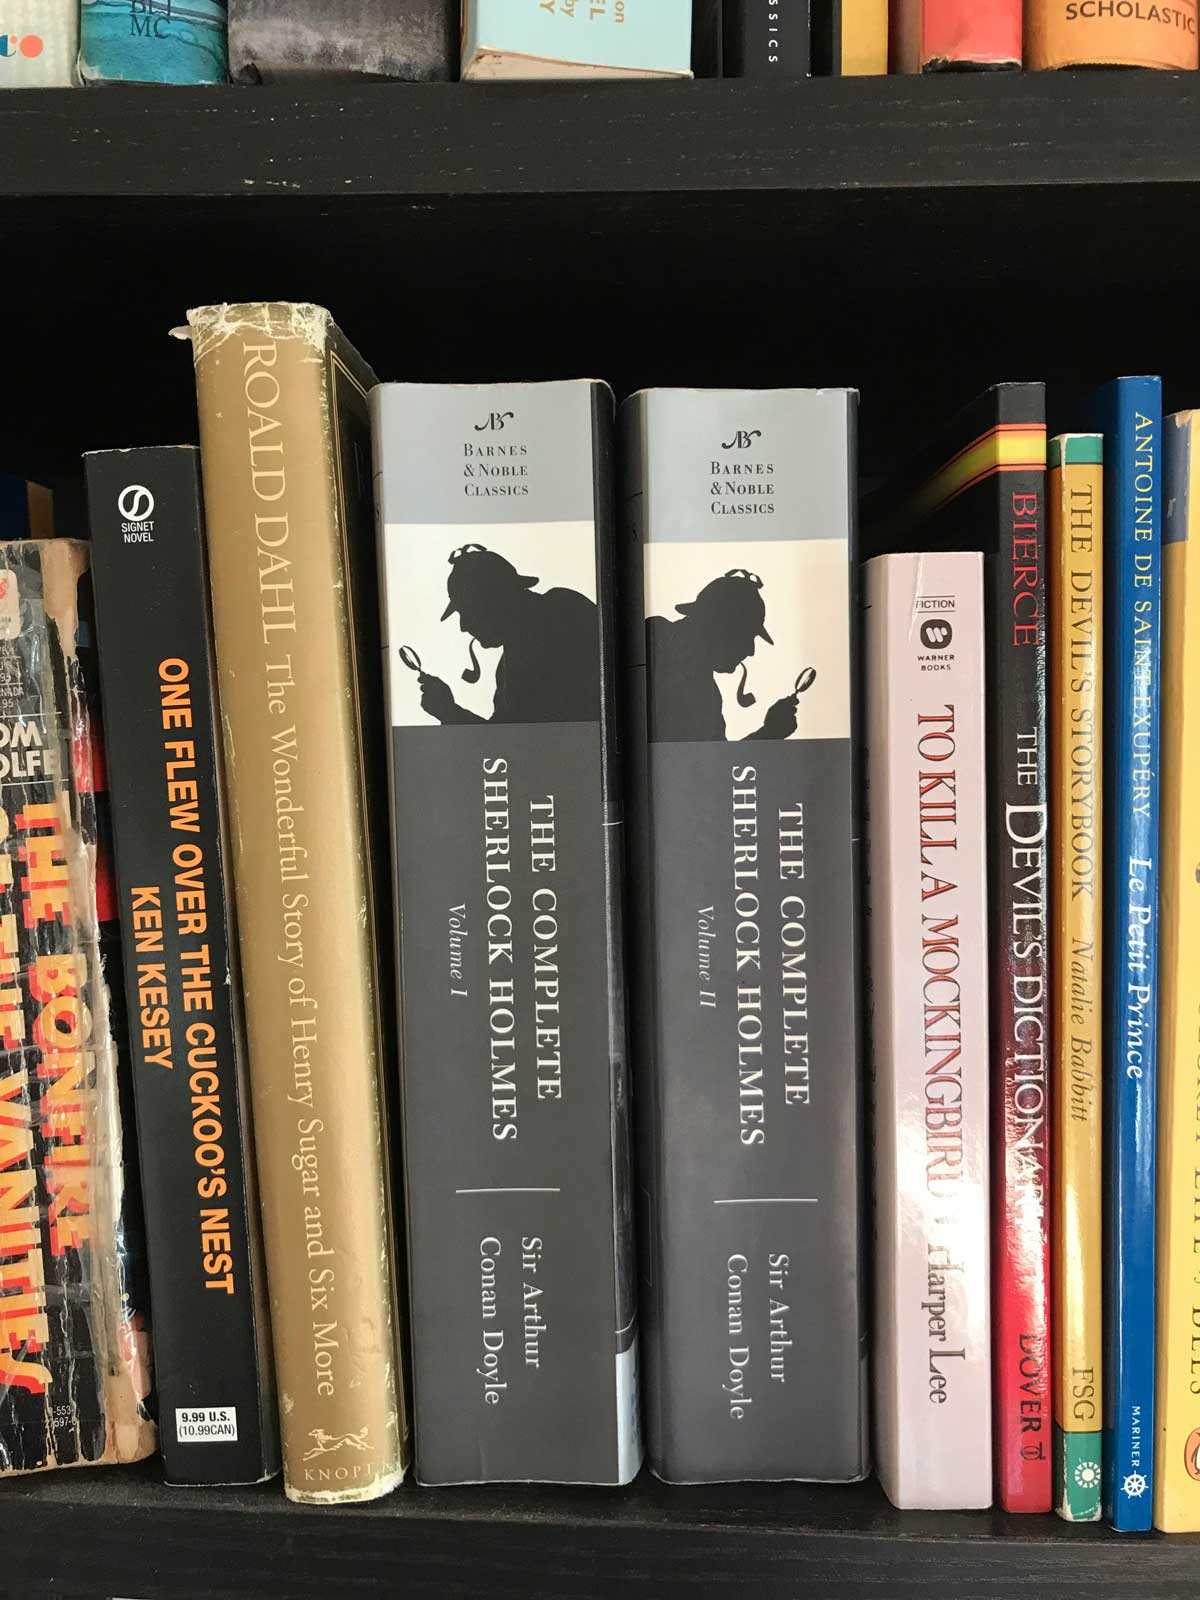 My daughter thought this set of Sherlock Holmes book spines looked like a koala wearing earrings, playing maracas